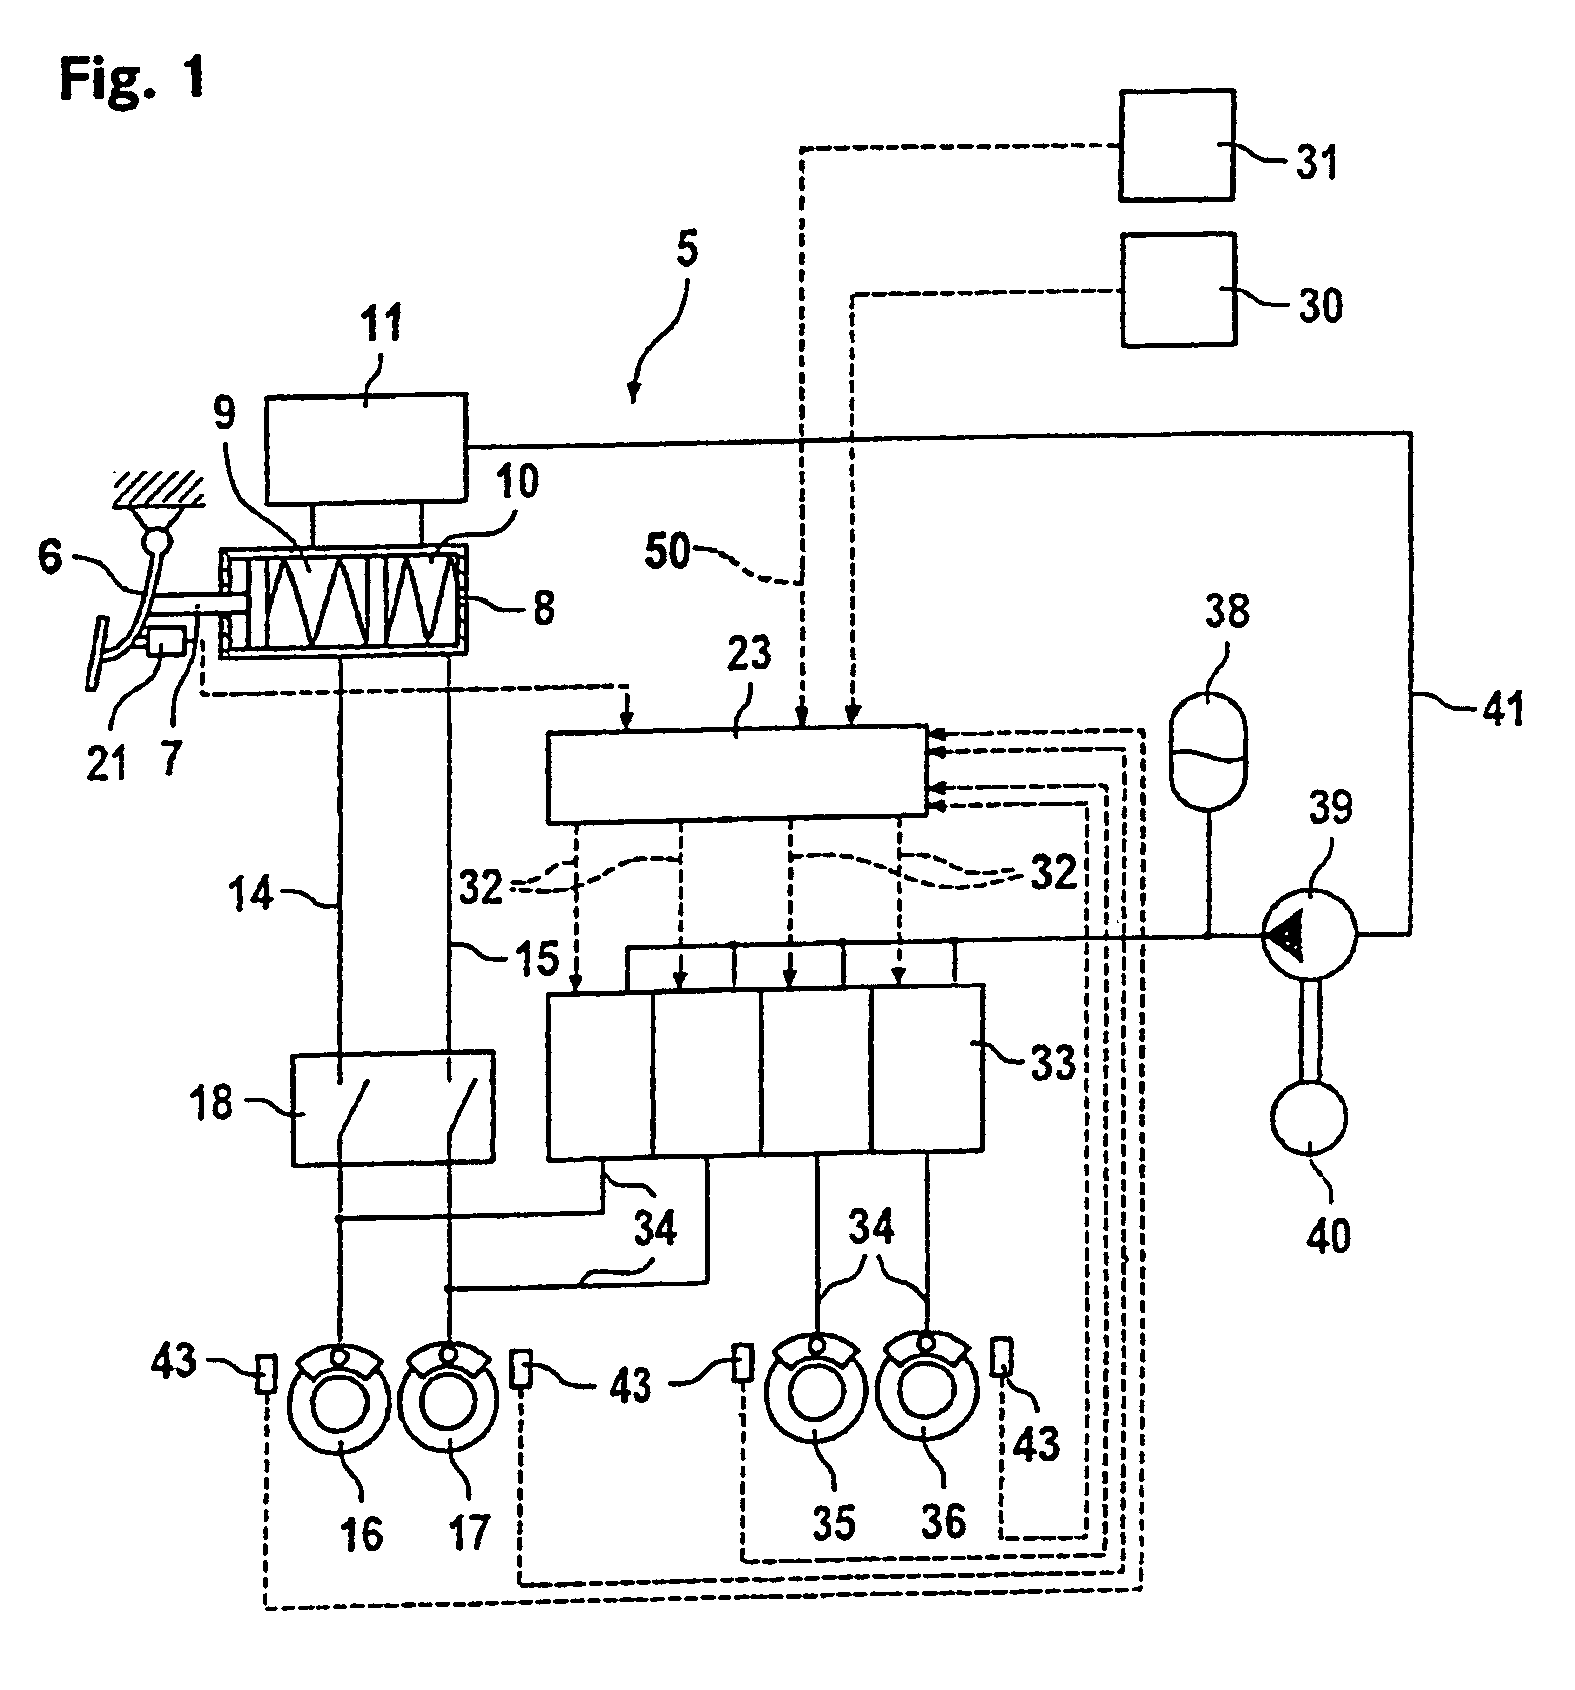 Method and device for detecting the initiation of the driving off process by a driver of a vehicle